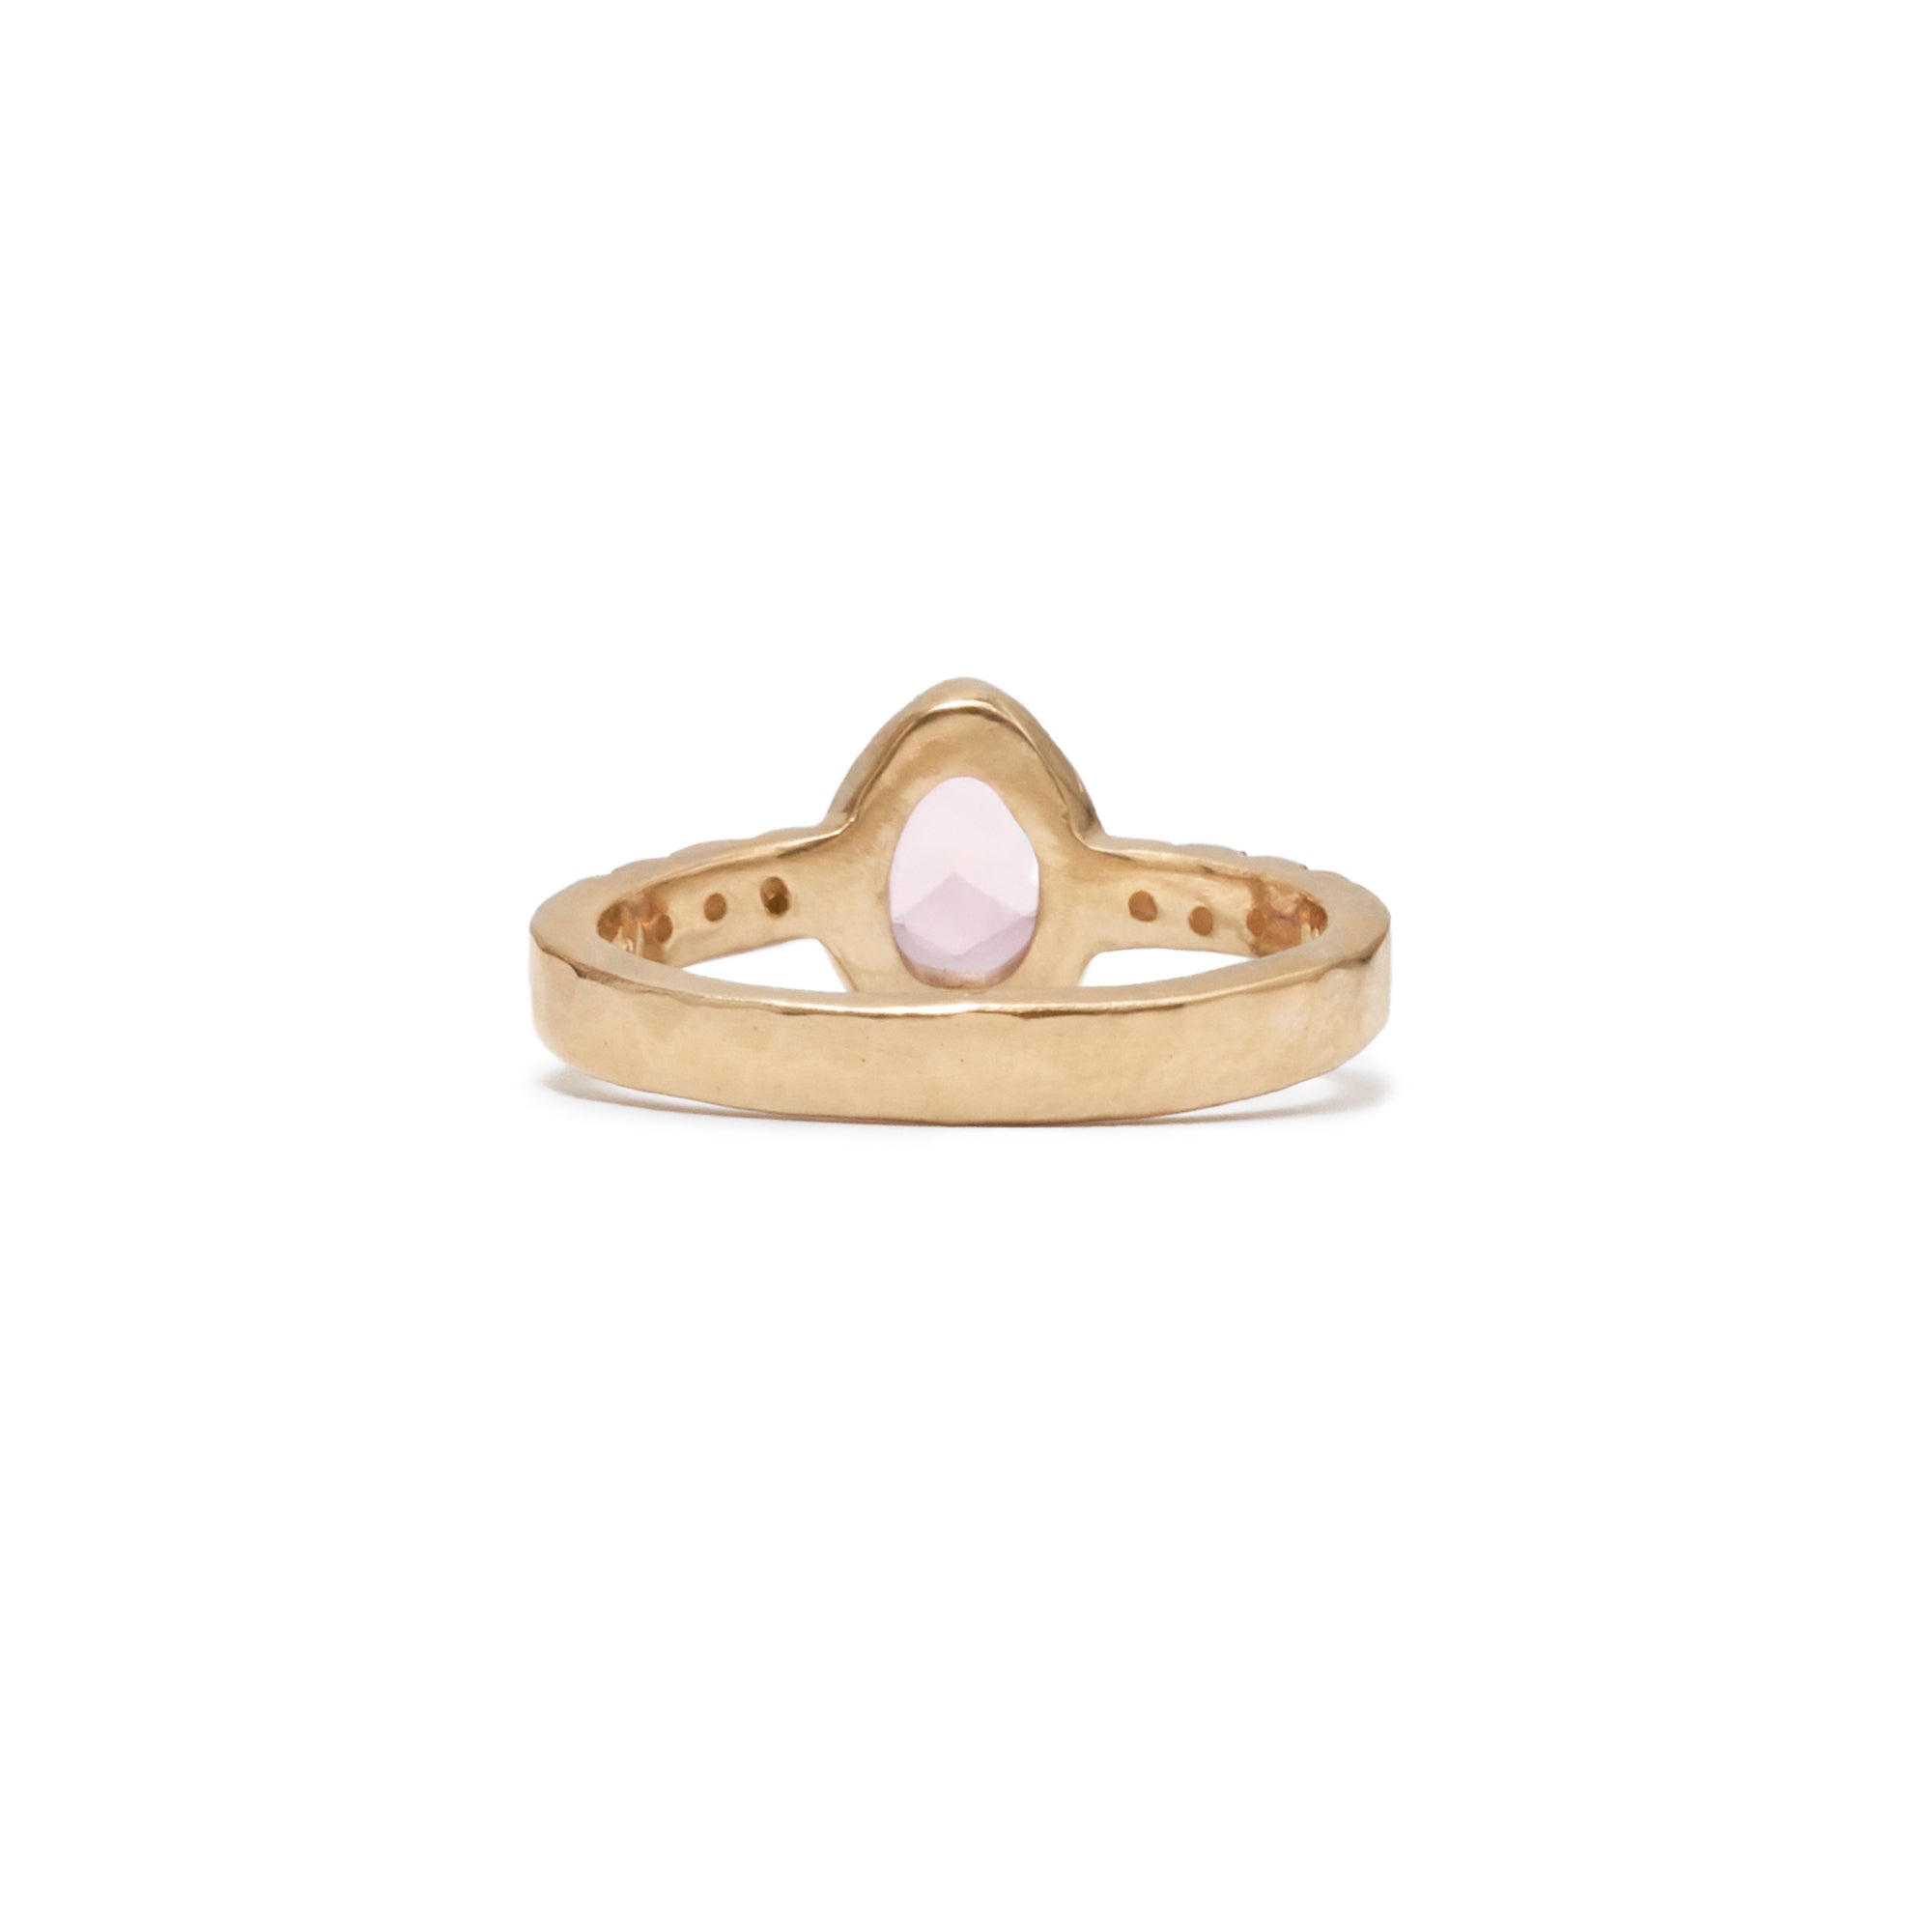 This organic rose cut pink sapphire is bezel set in 14k gold flanked with 3 diamonds set in the band on each side.